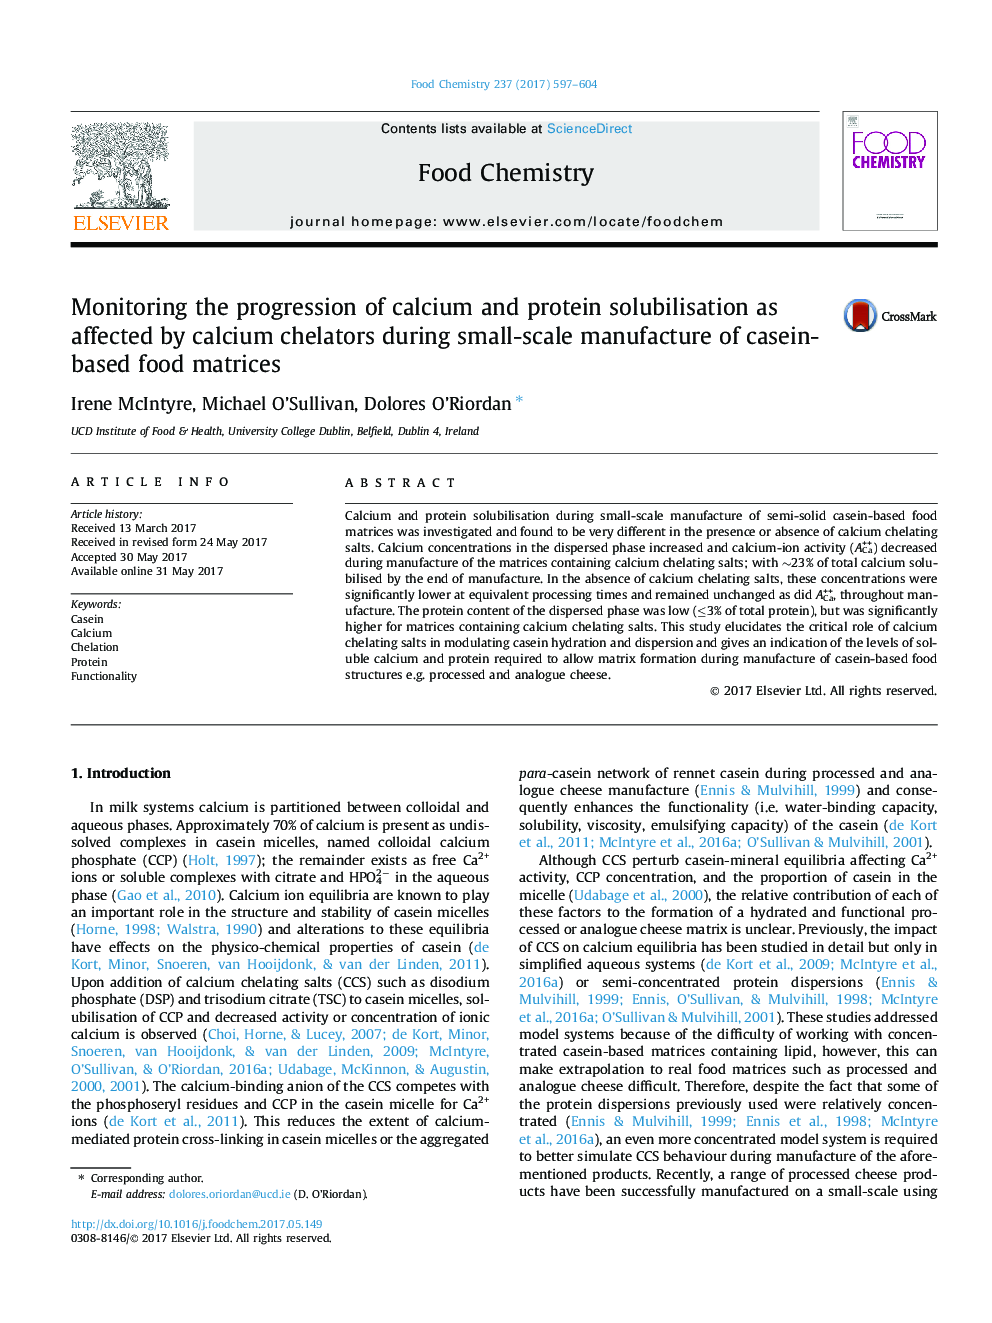 Monitoring the progression of calcium and protein solubilisation as affected by calcium chelators during small-scale manufacture of casein-based food matrices